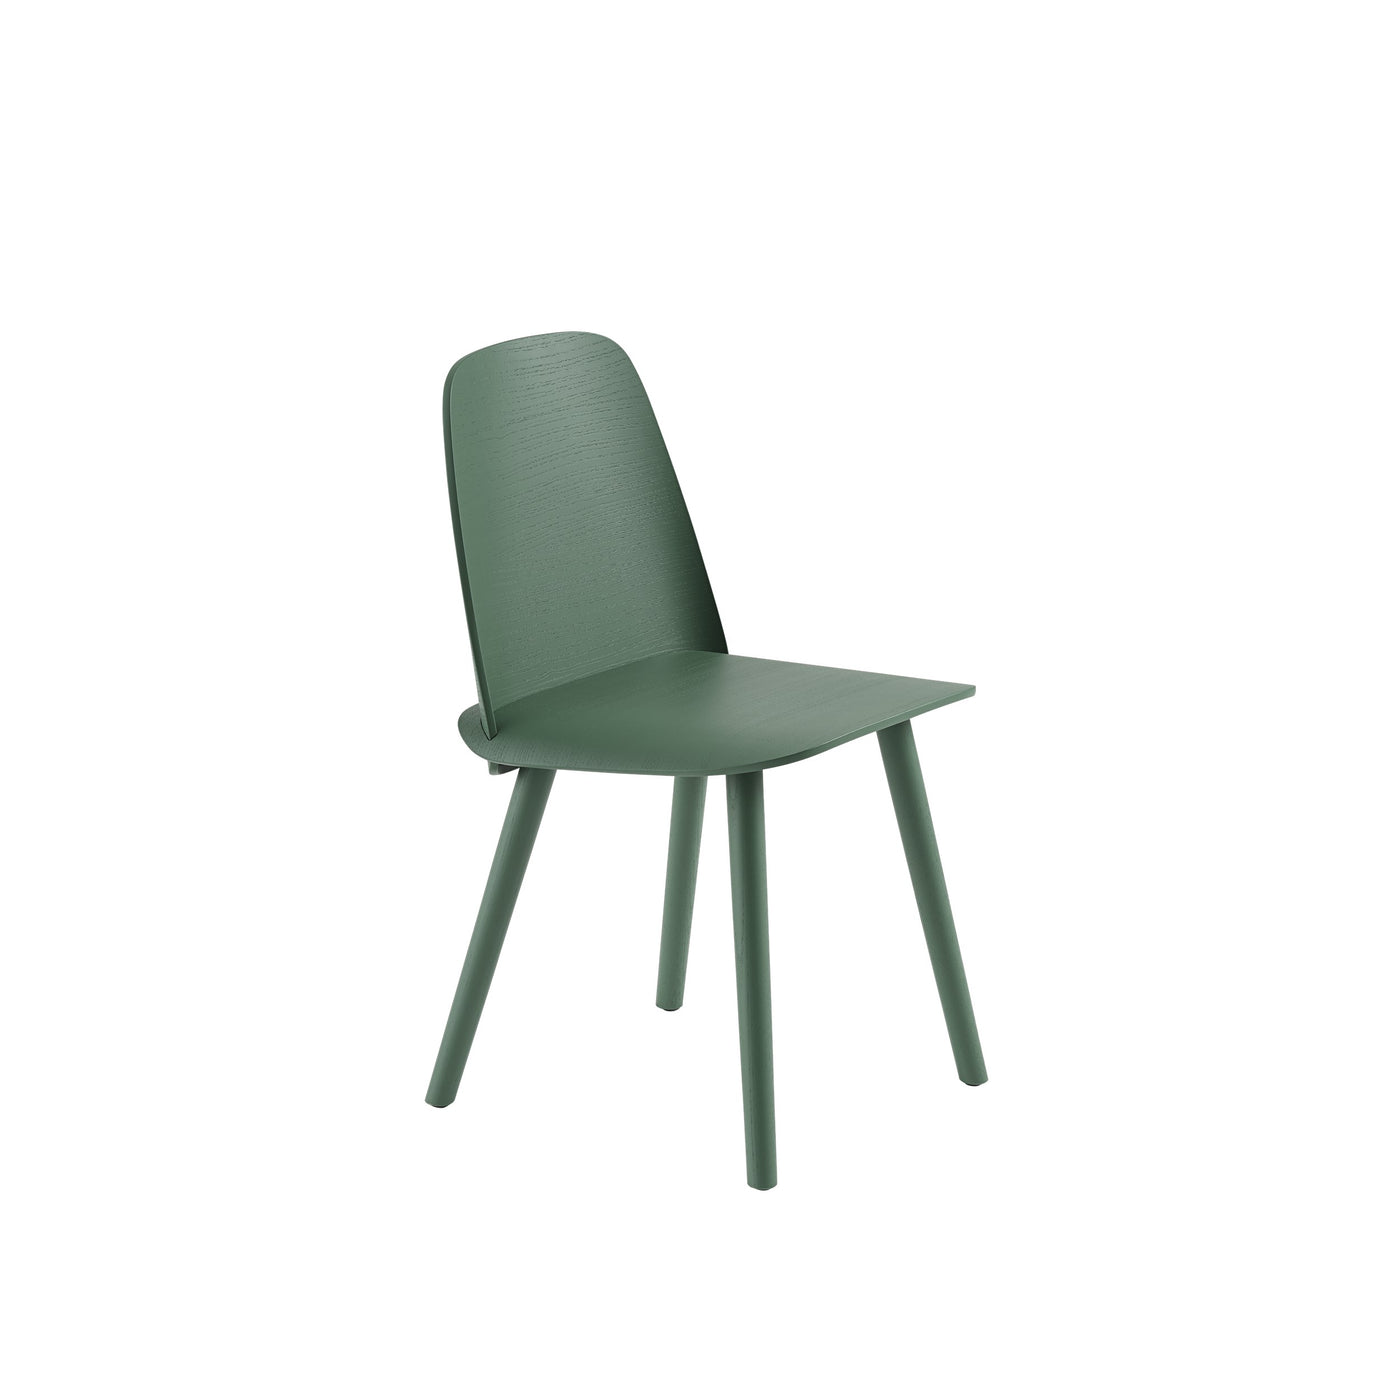 Muuto Nerd Chair. Shop online at someday designs. #colour_green